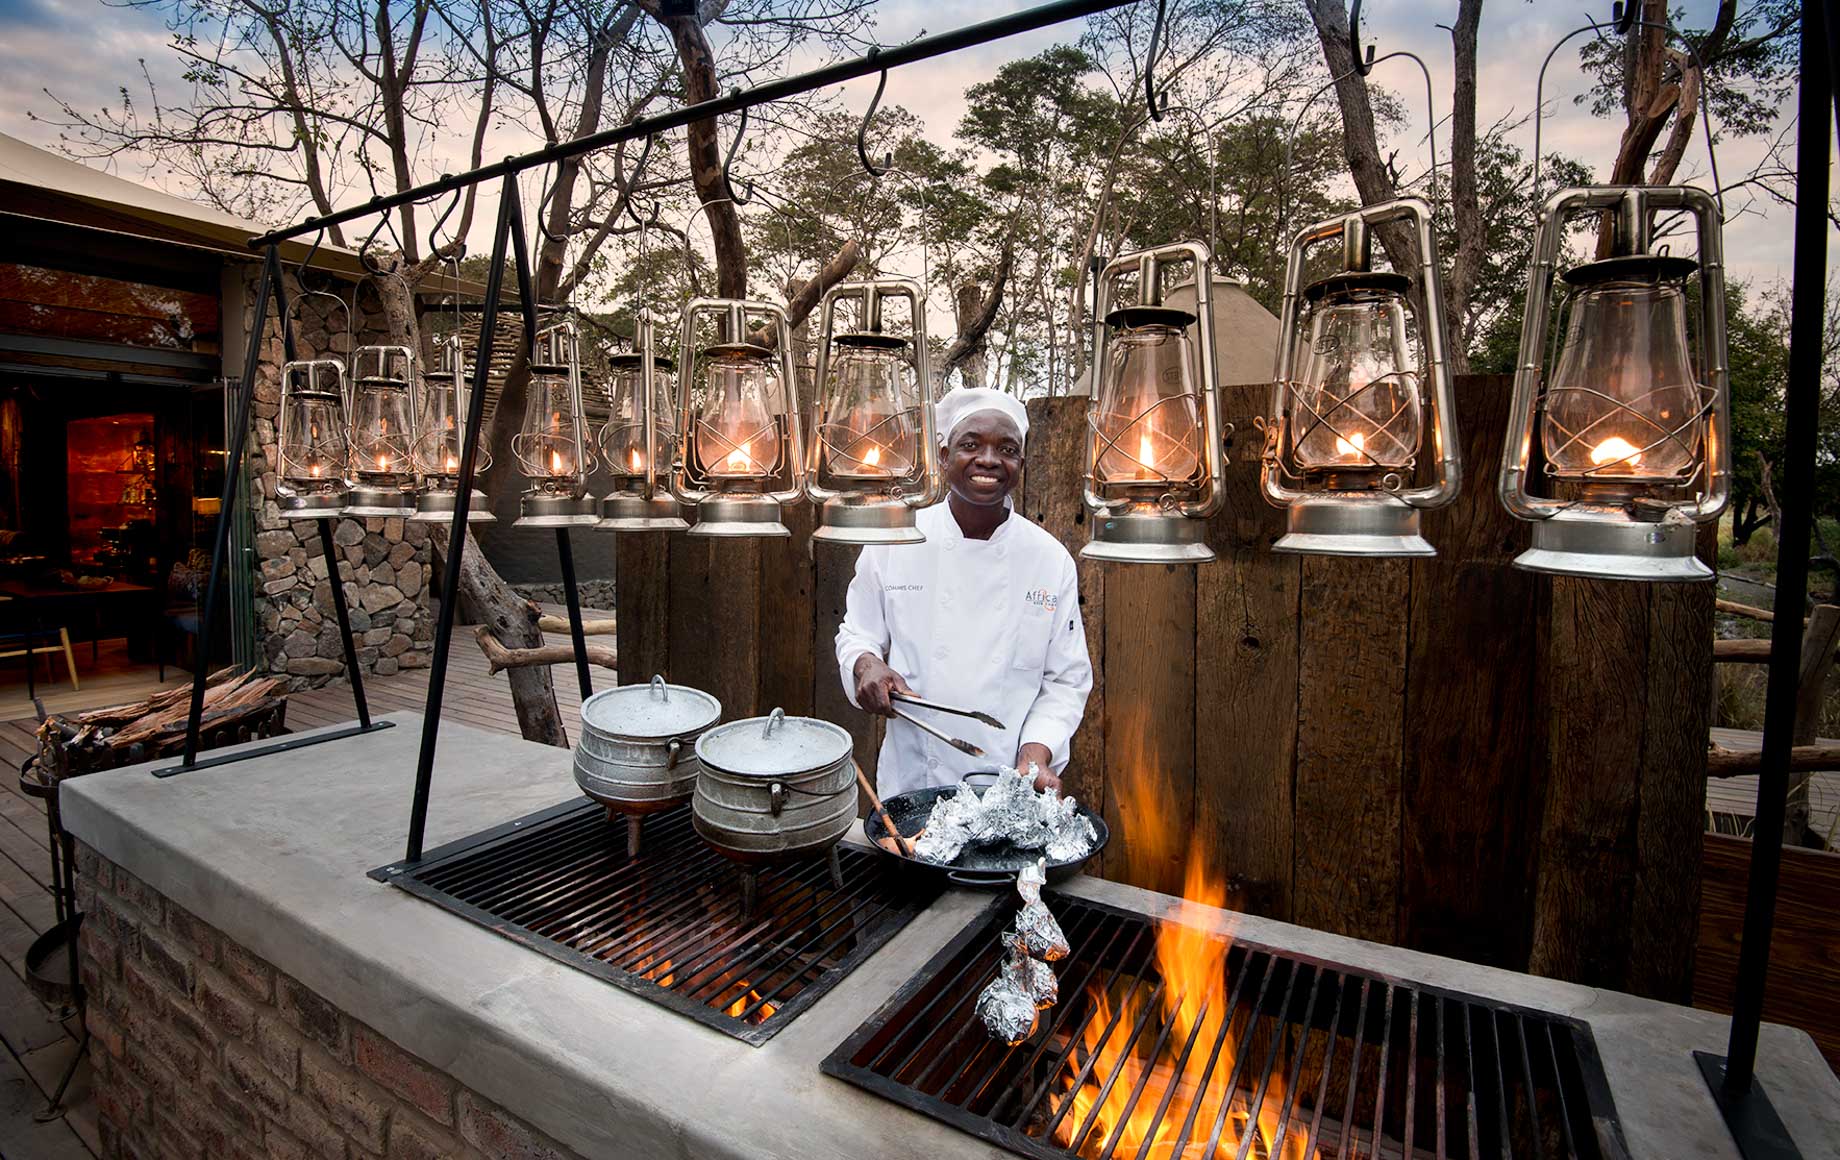 Chef cooks on outdoor grill at Thorntree River Lodge